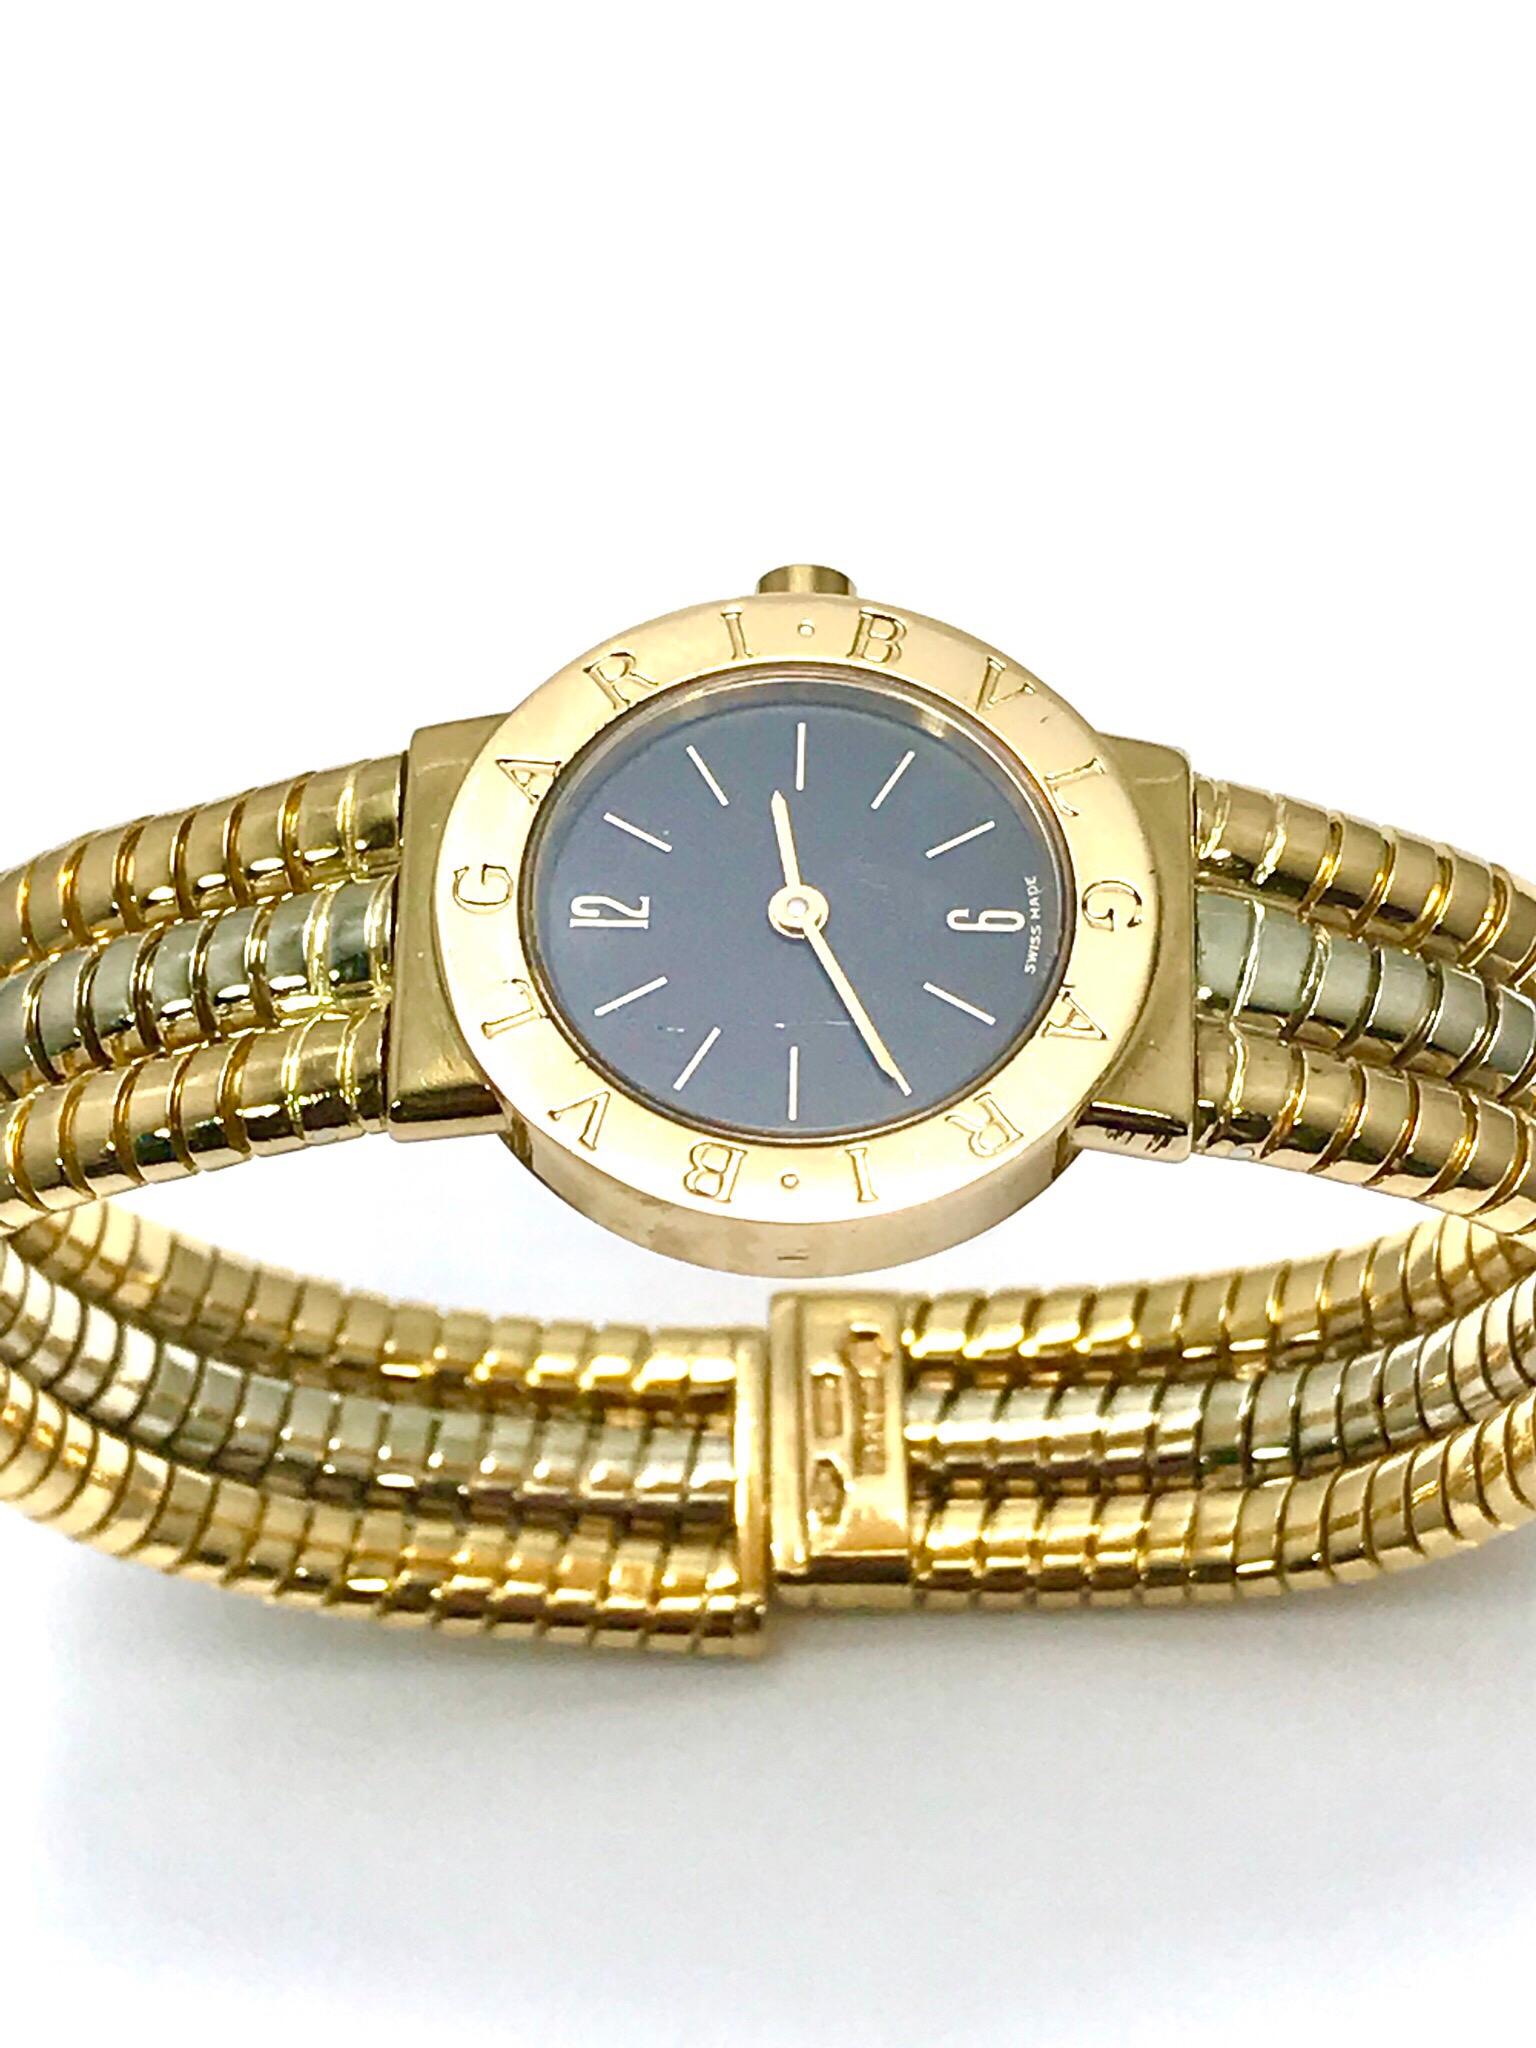 An easy to slip on Bulgari tubogas 18 kaart yellow, rose, and white gold open flex watch bangle bracelet.  The watch dial features arabic numerals at 12 and 6, with index markers as the other hour indicators.  The bezel is engraved with 